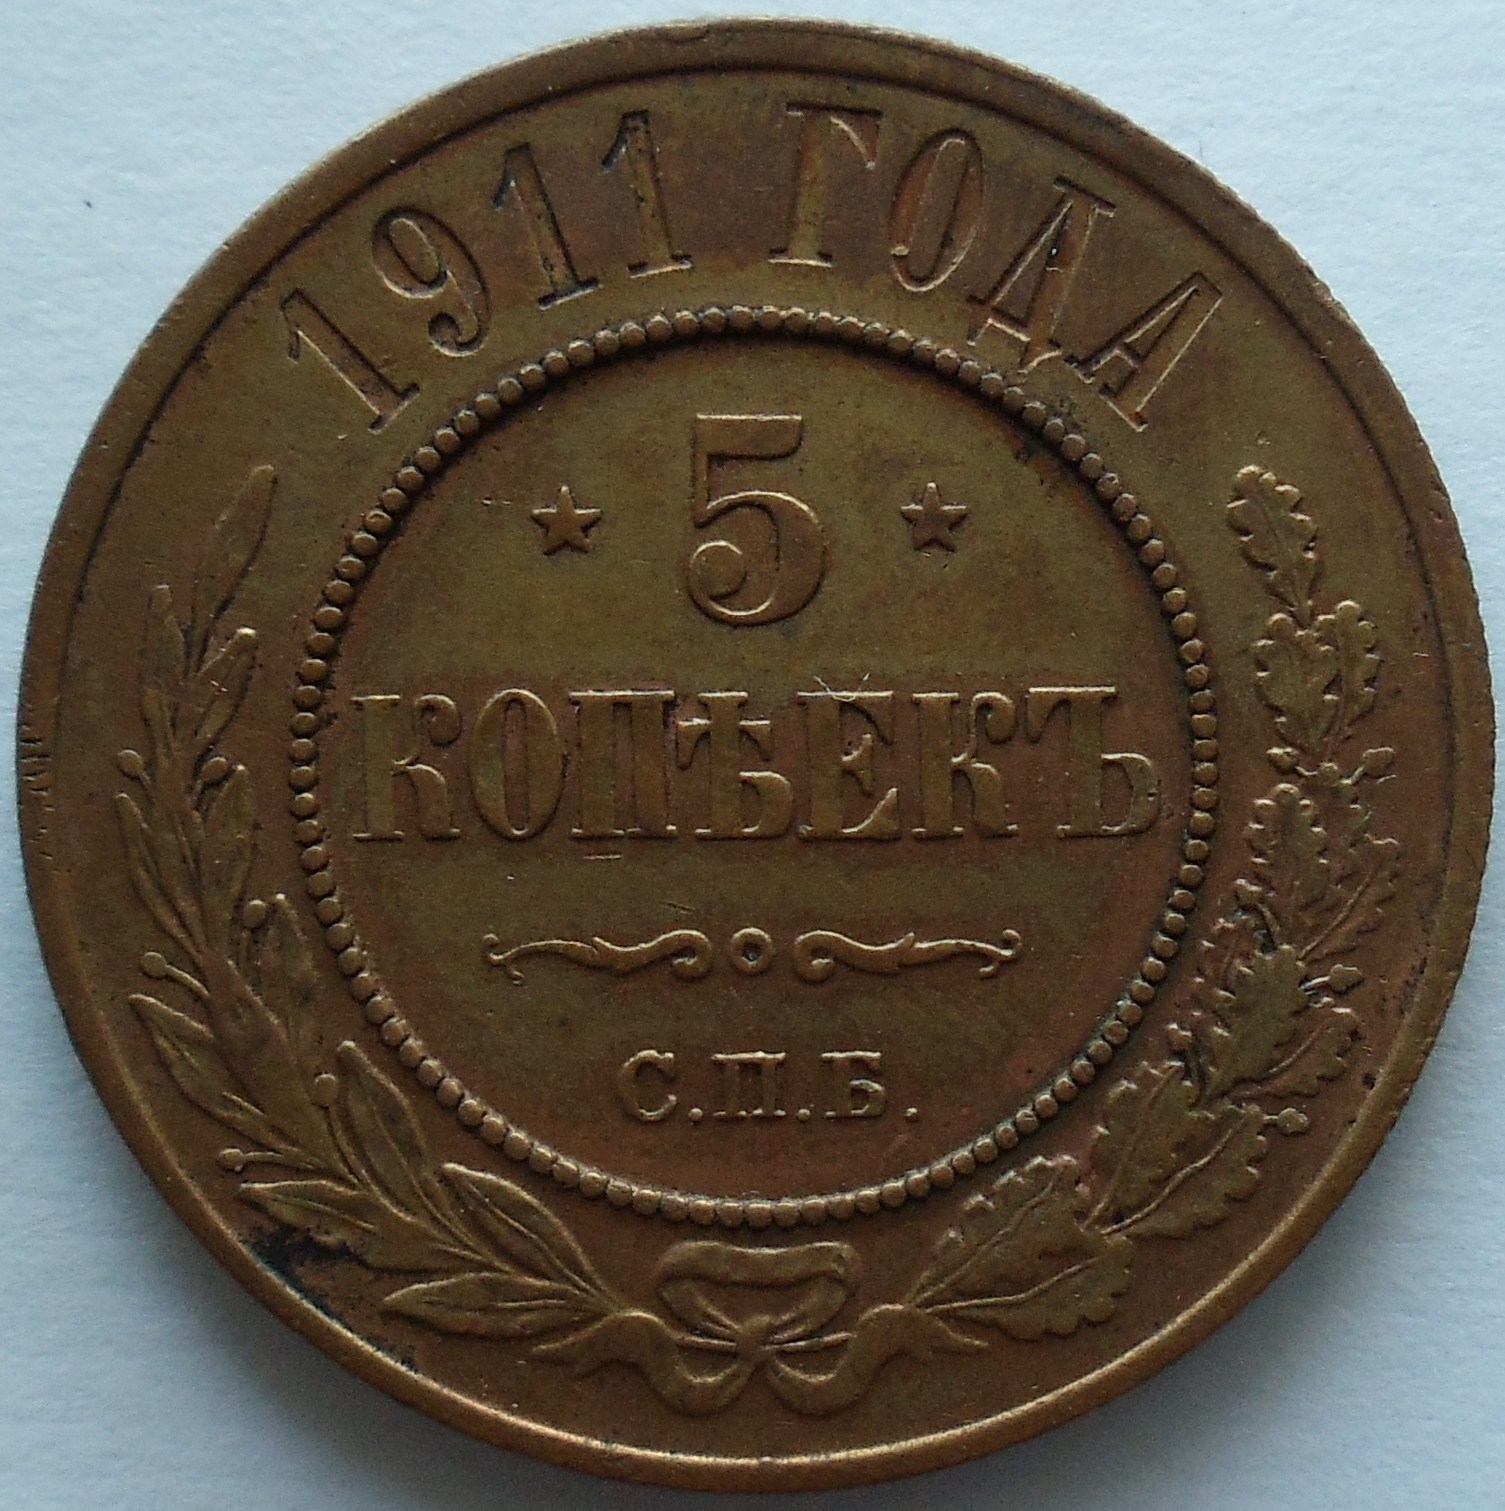 Andreyweb Russian coins for sale : Copper сoins of Russia ...